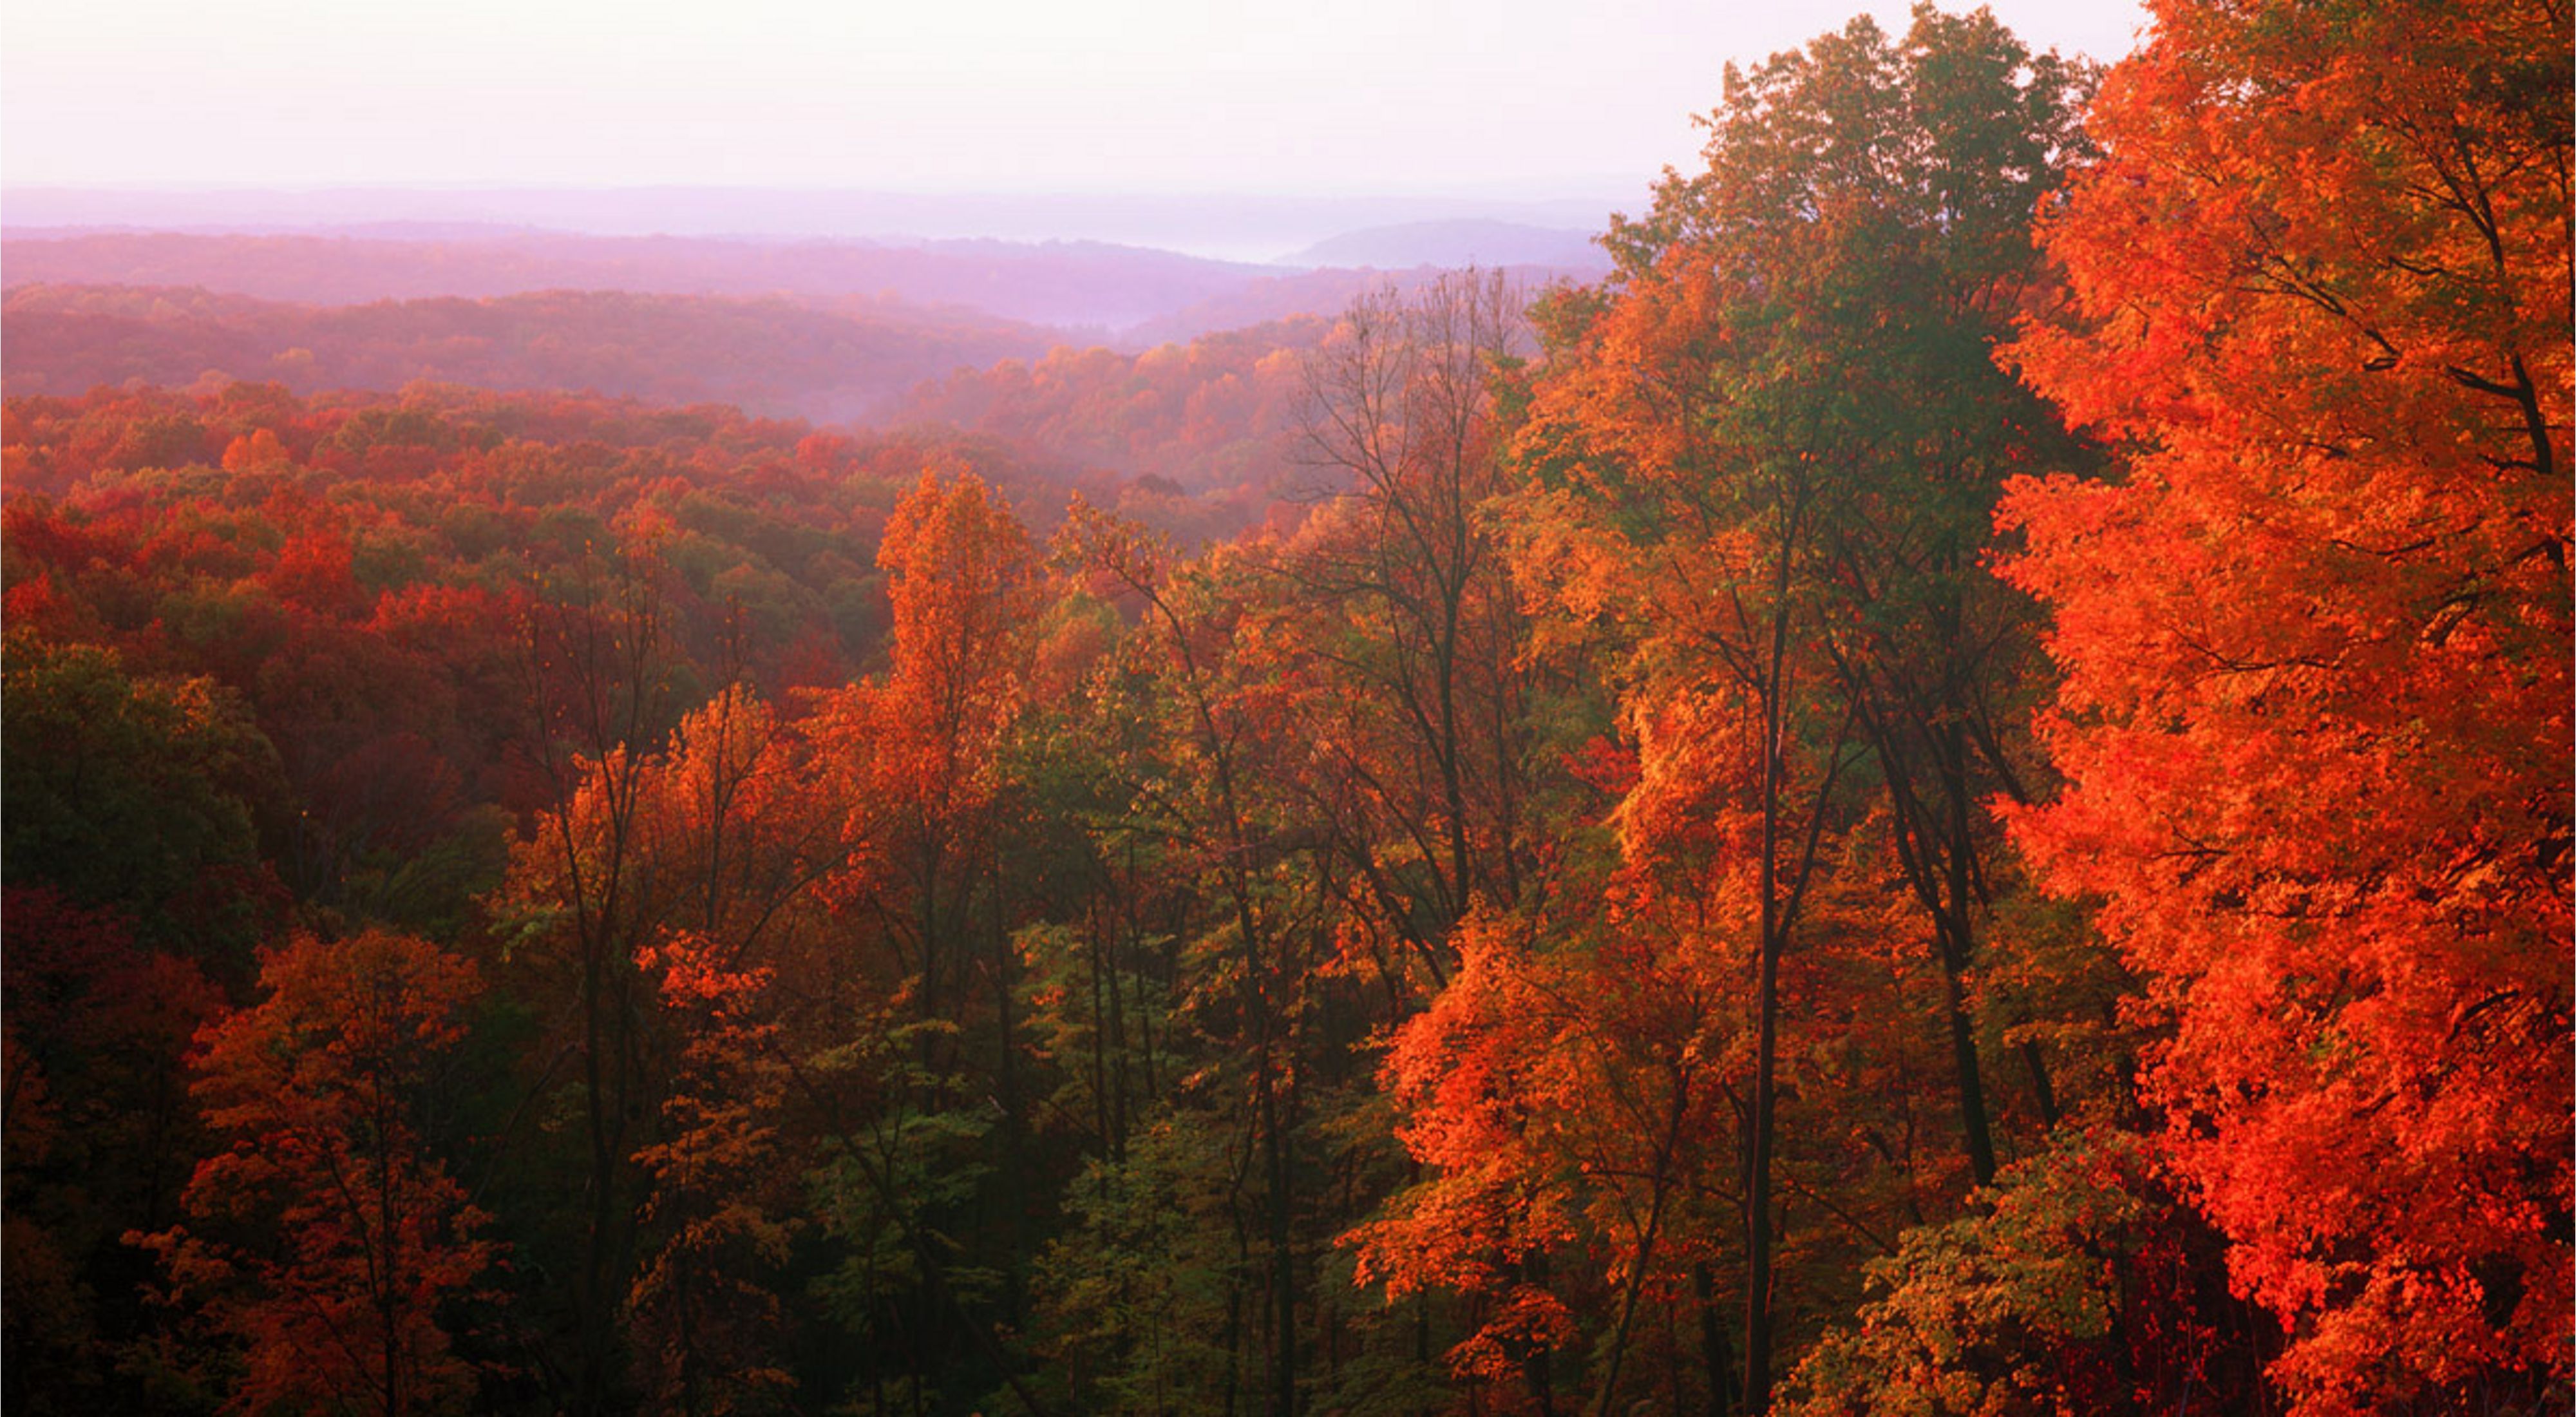 Fall foliage in Brown County Hills, Indiana